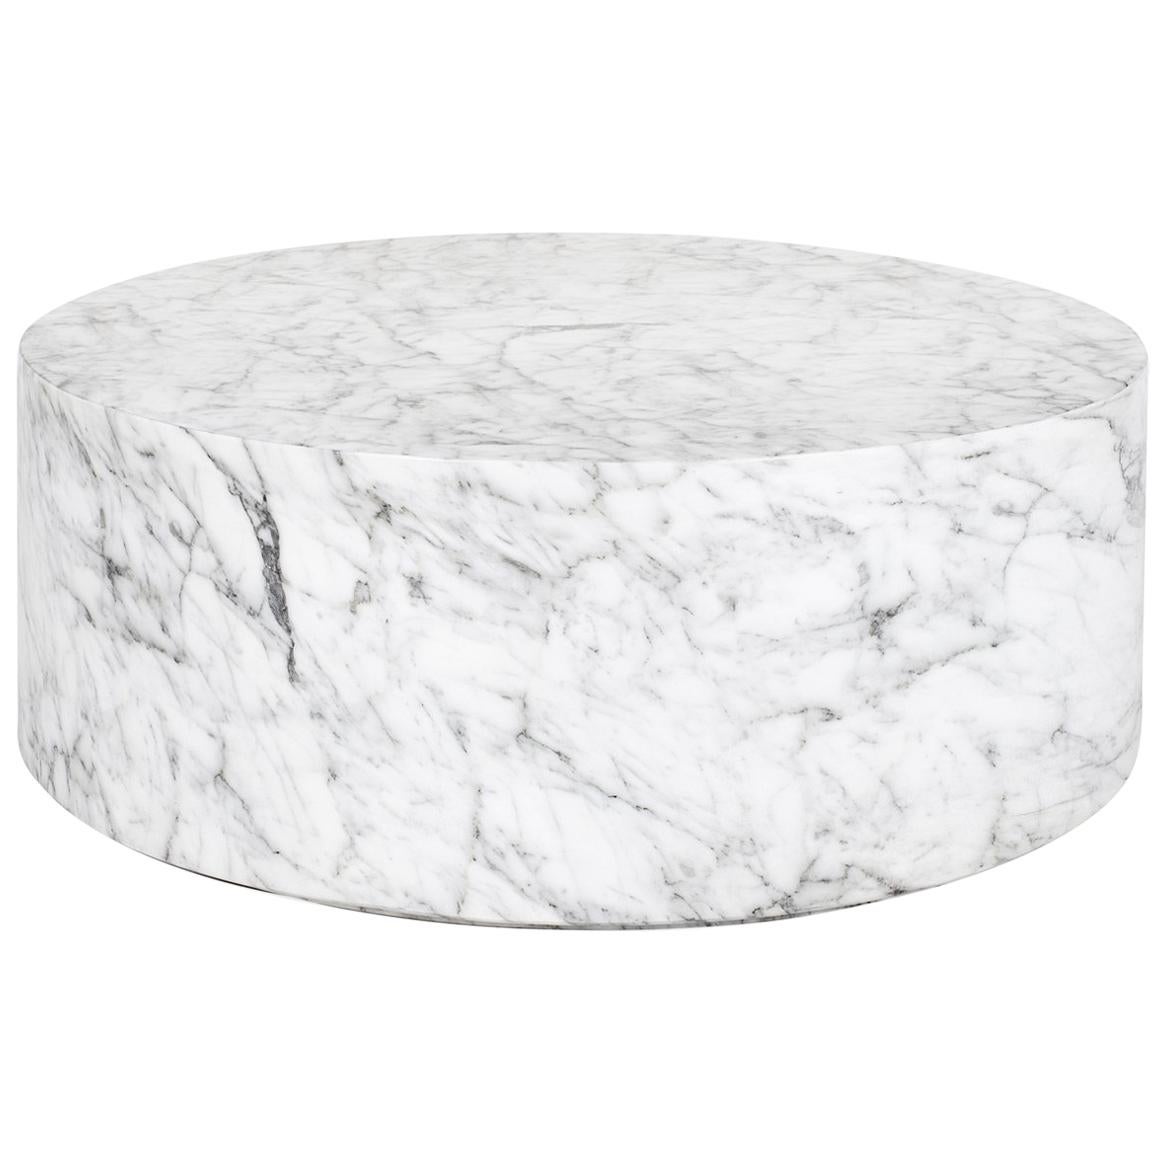 Round Carrera Marble Coffee Table in White